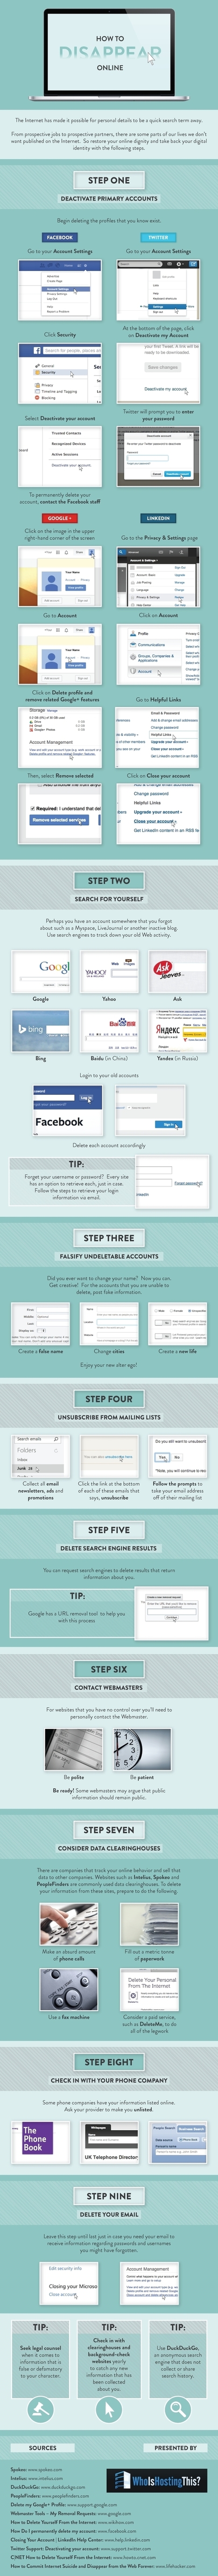 How to Disappear from the Internet [INFOGRAPHIC] | SocialMedia_me | Scoop.it